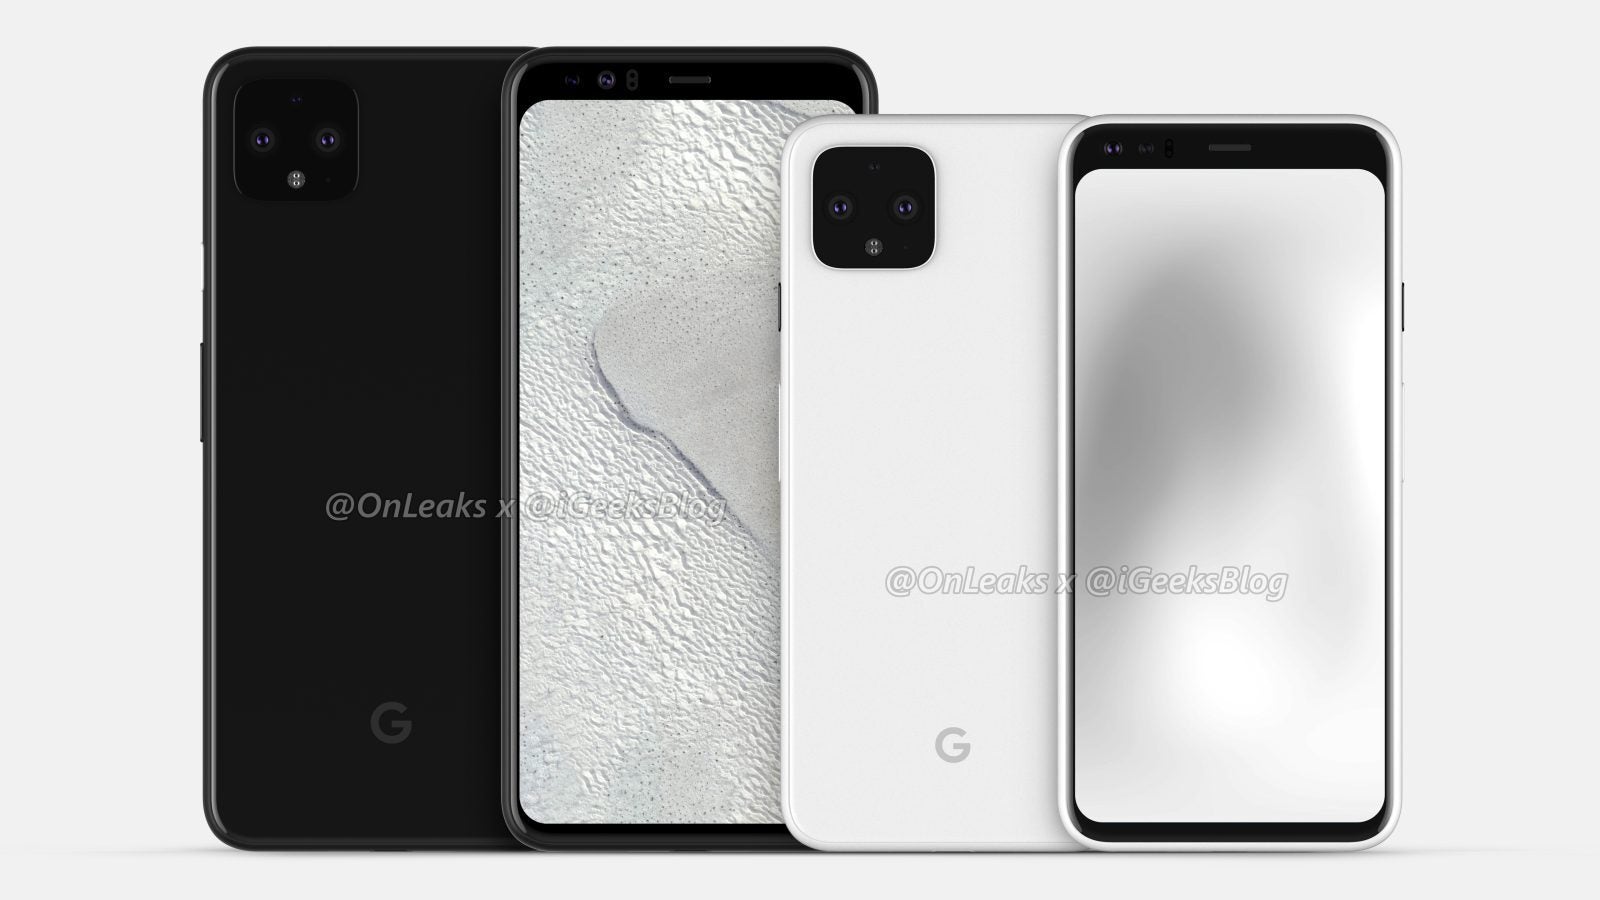 Google Pixel 4 and Pixel 4 XL rumor review: Design, specs, camera, price and release date